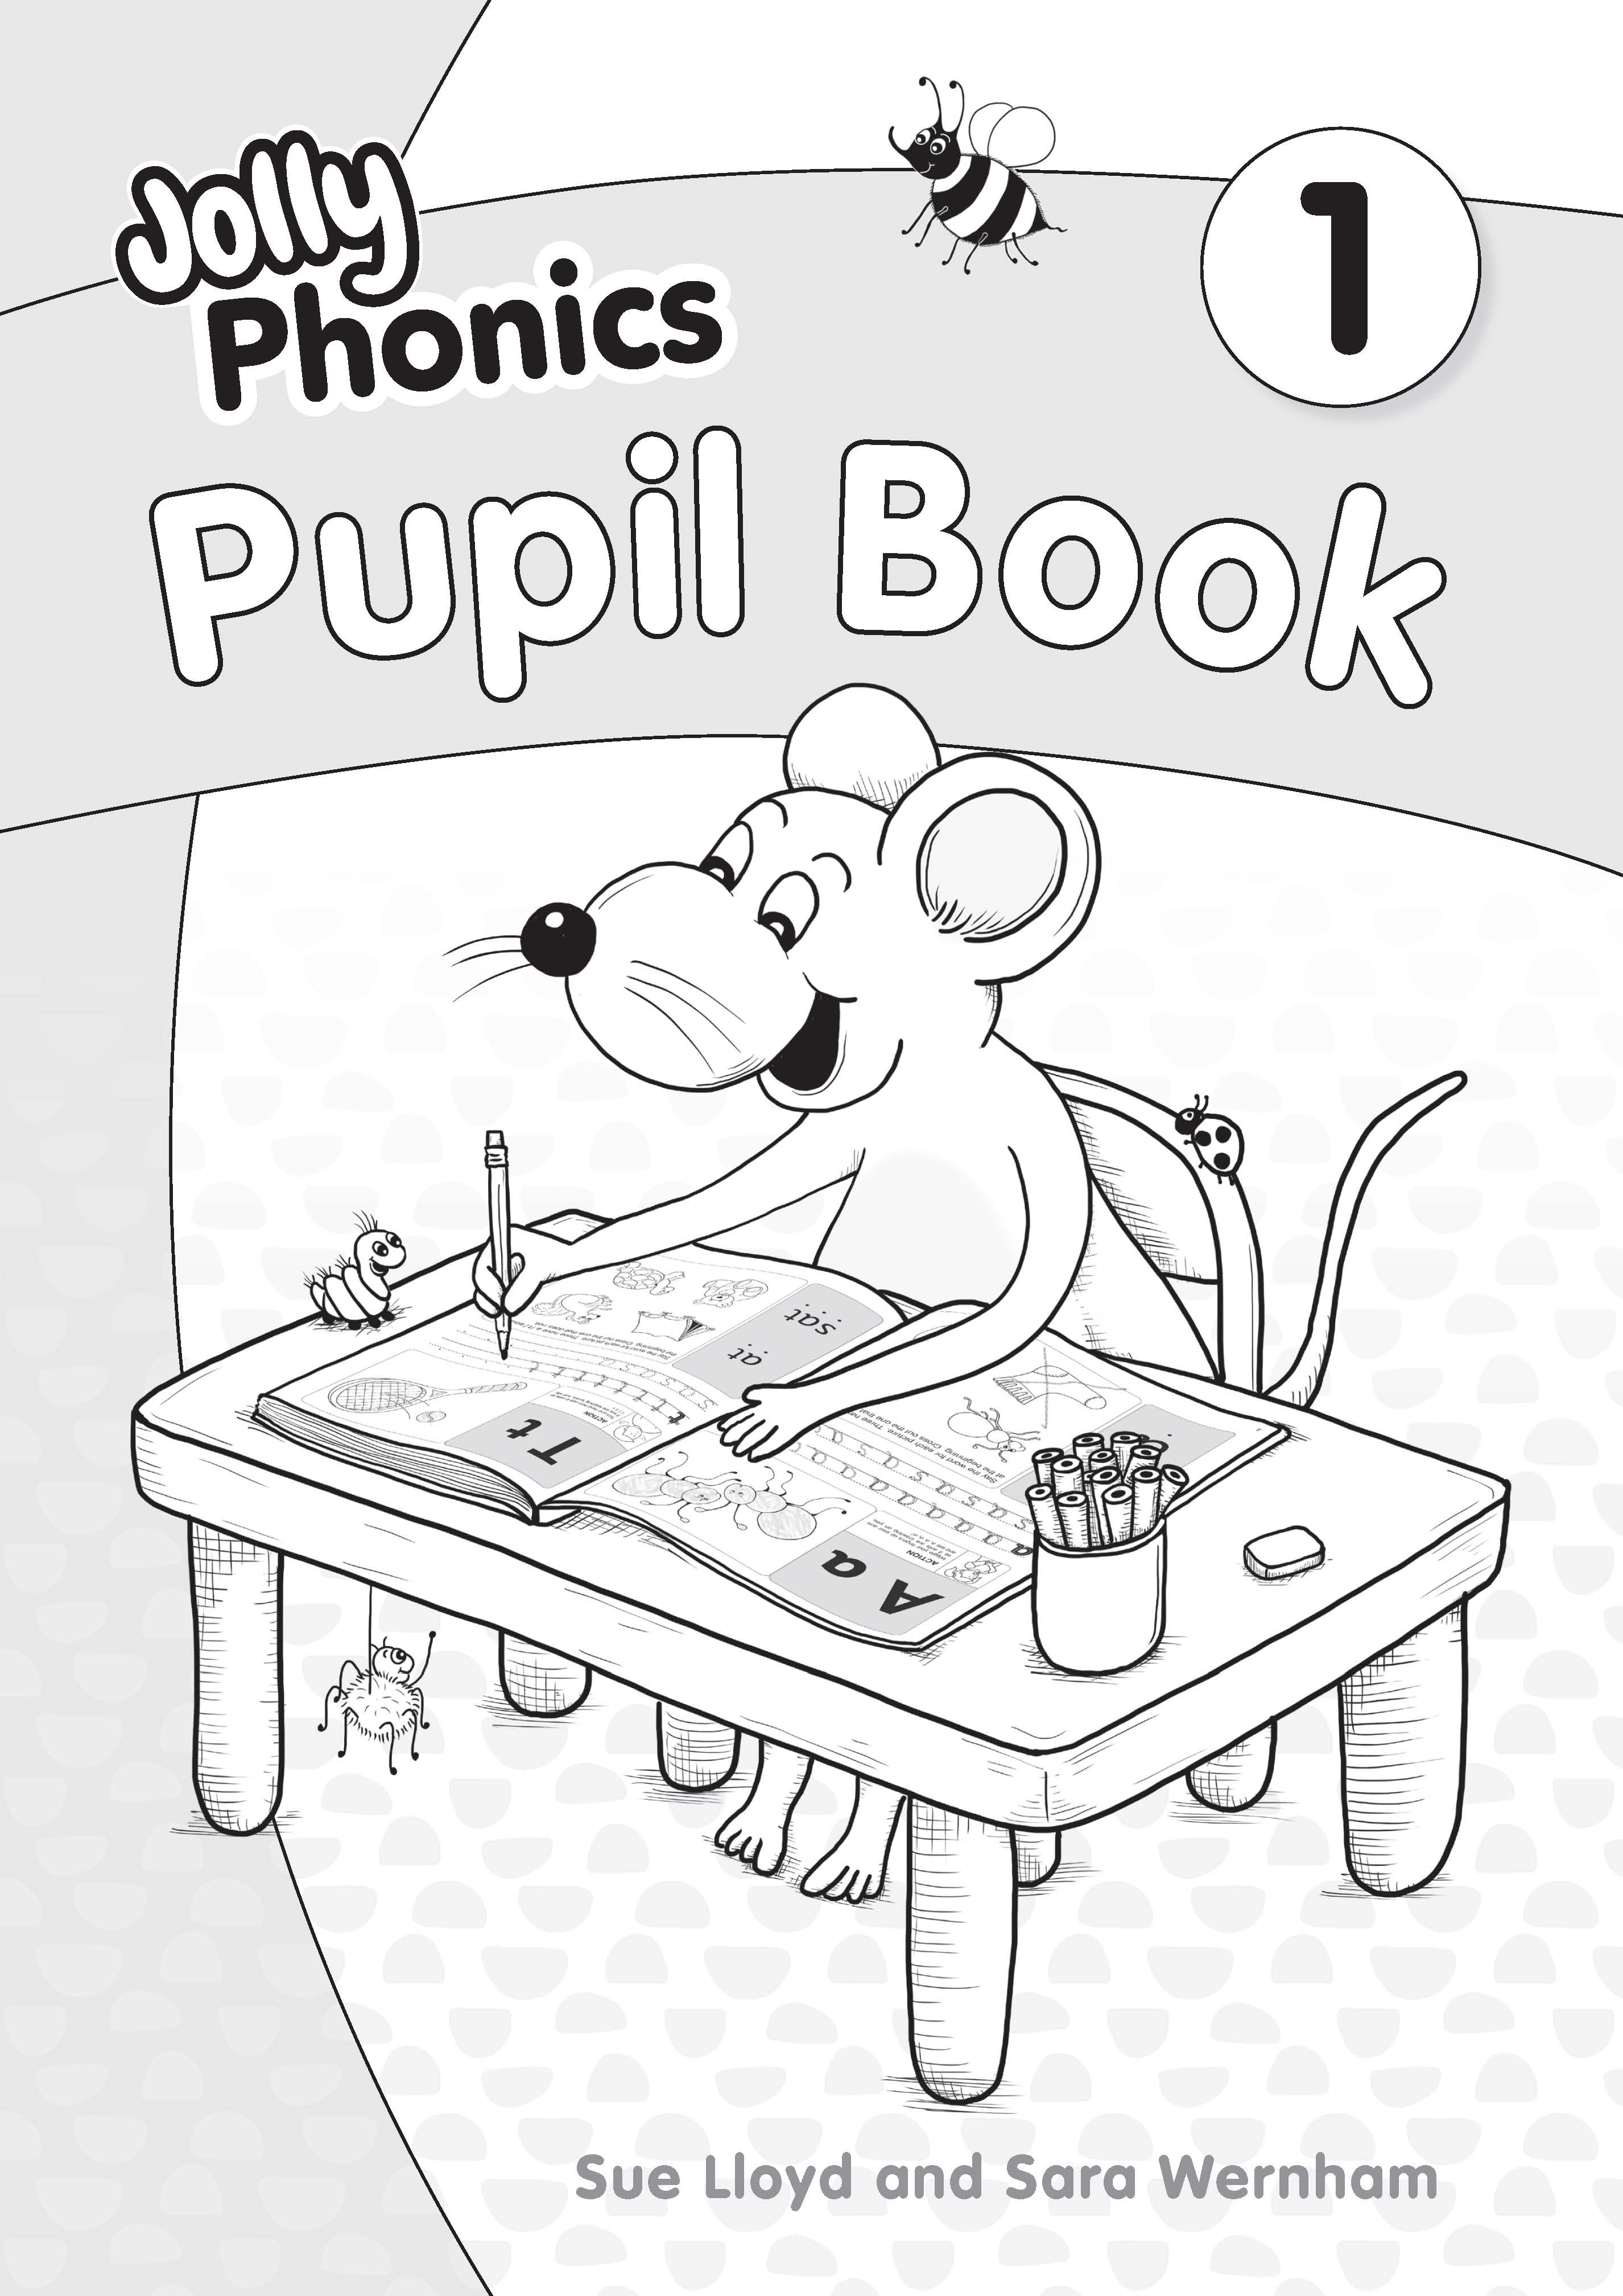 Pupil　Hope　HP00053320　Book　Education　Jolly　White　and　Phonics　Black　Version